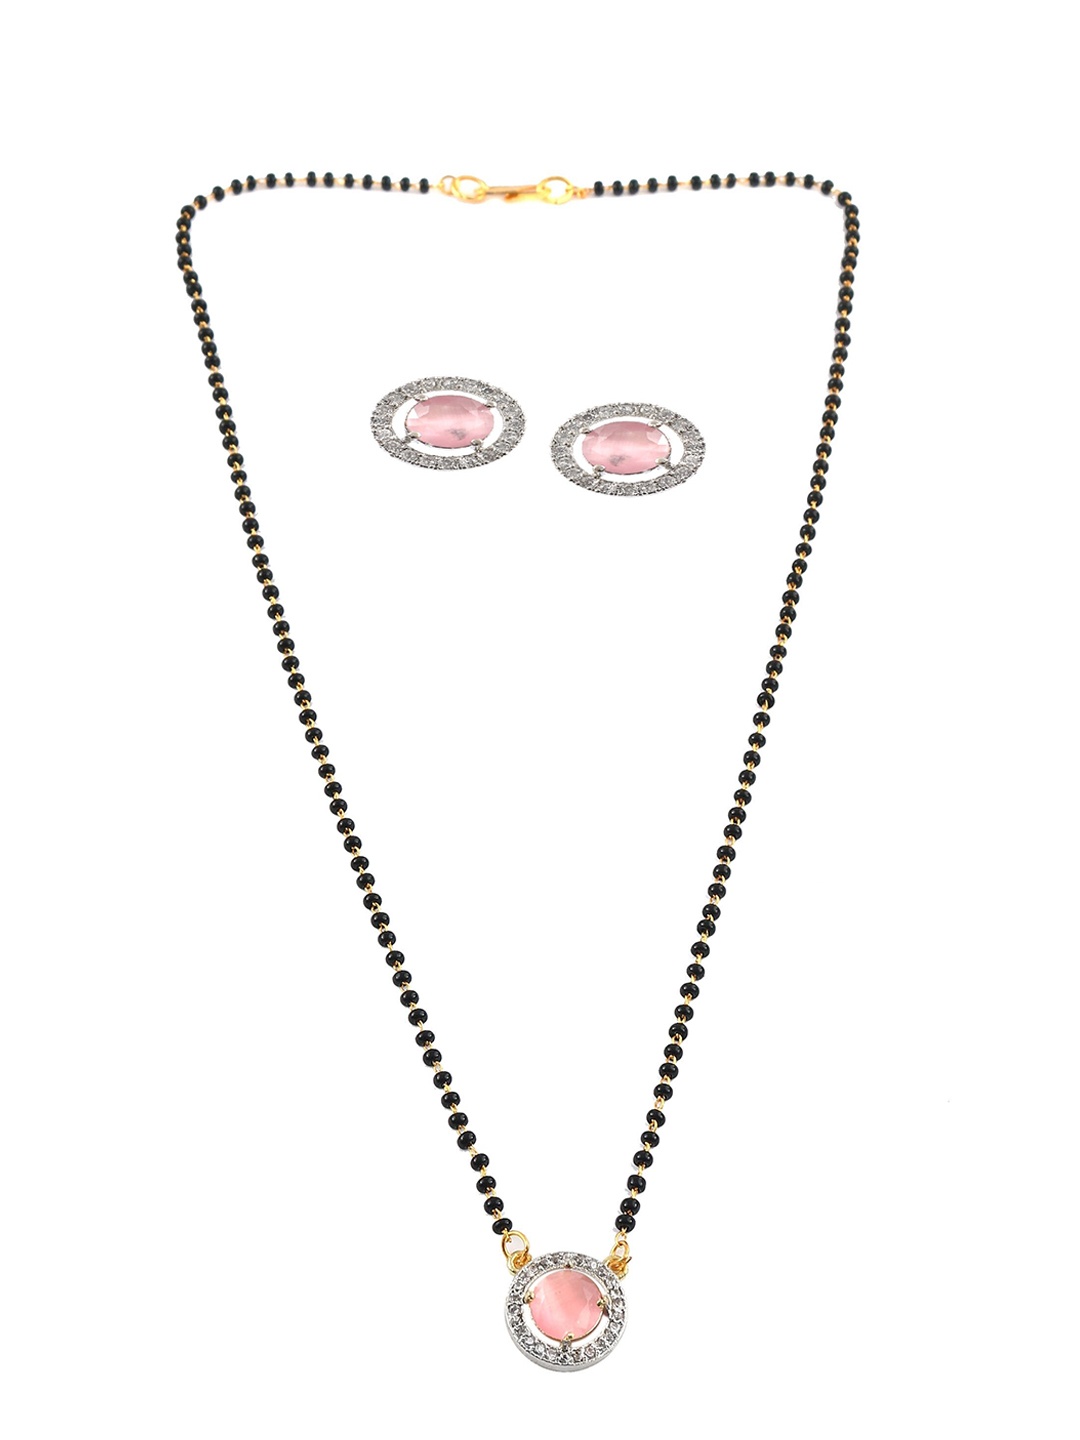 

Jewar Mandi Silver Gold-Plated CZ-Studded & Beaded Mangalsutra with Earrings, Pink